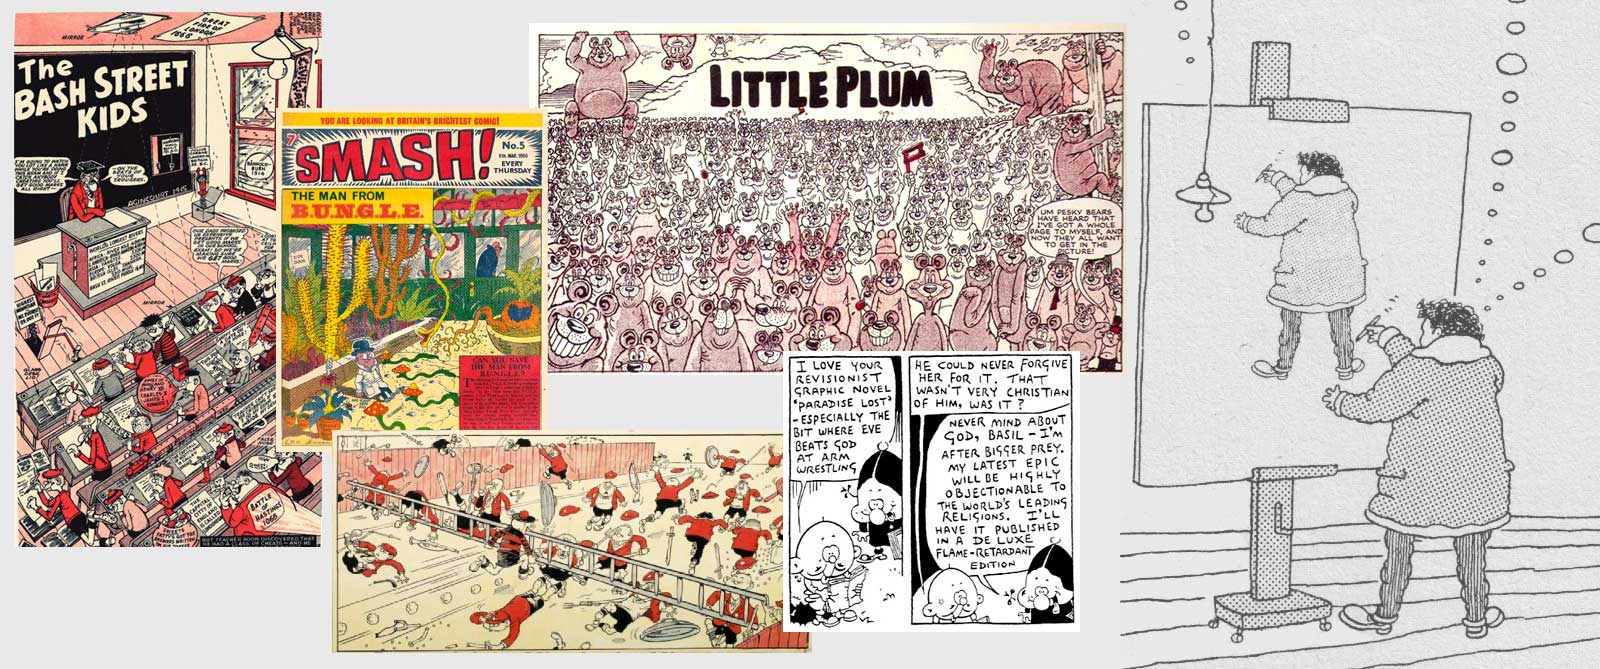 A montage of Leo Baxendale's work, including part of his self portrait